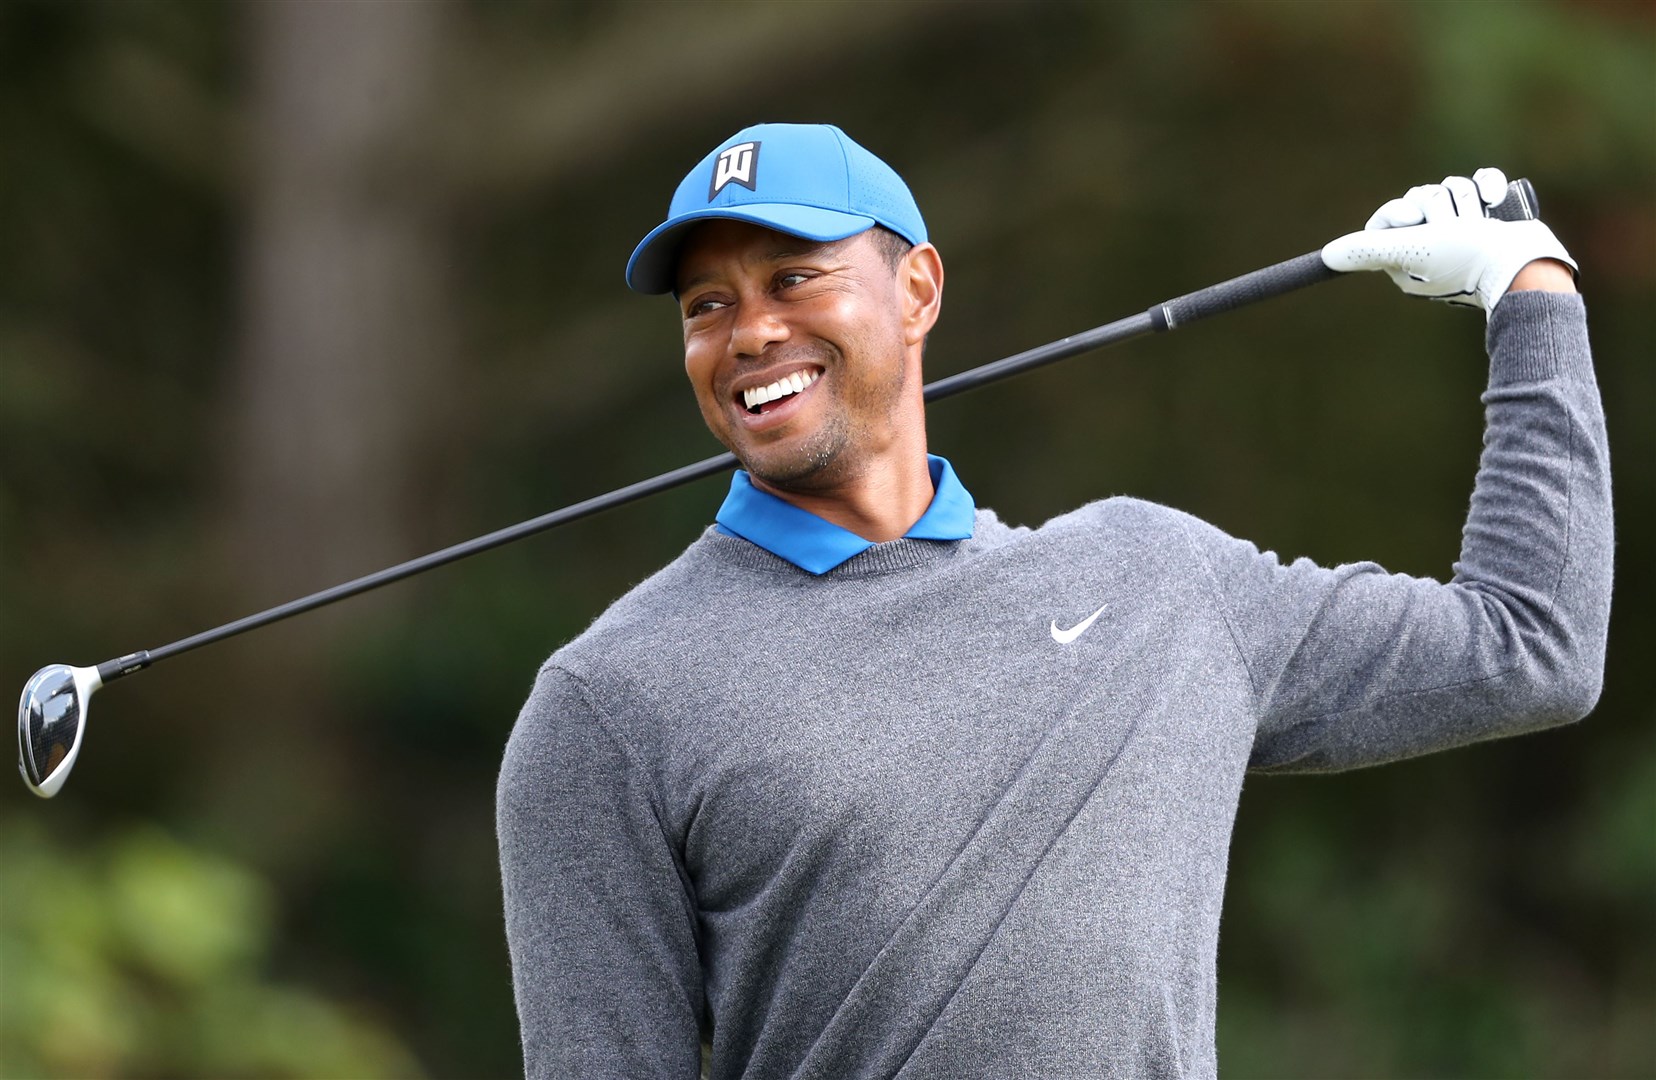 Woods won the Masters in 2019 (Niall Carson/PA)